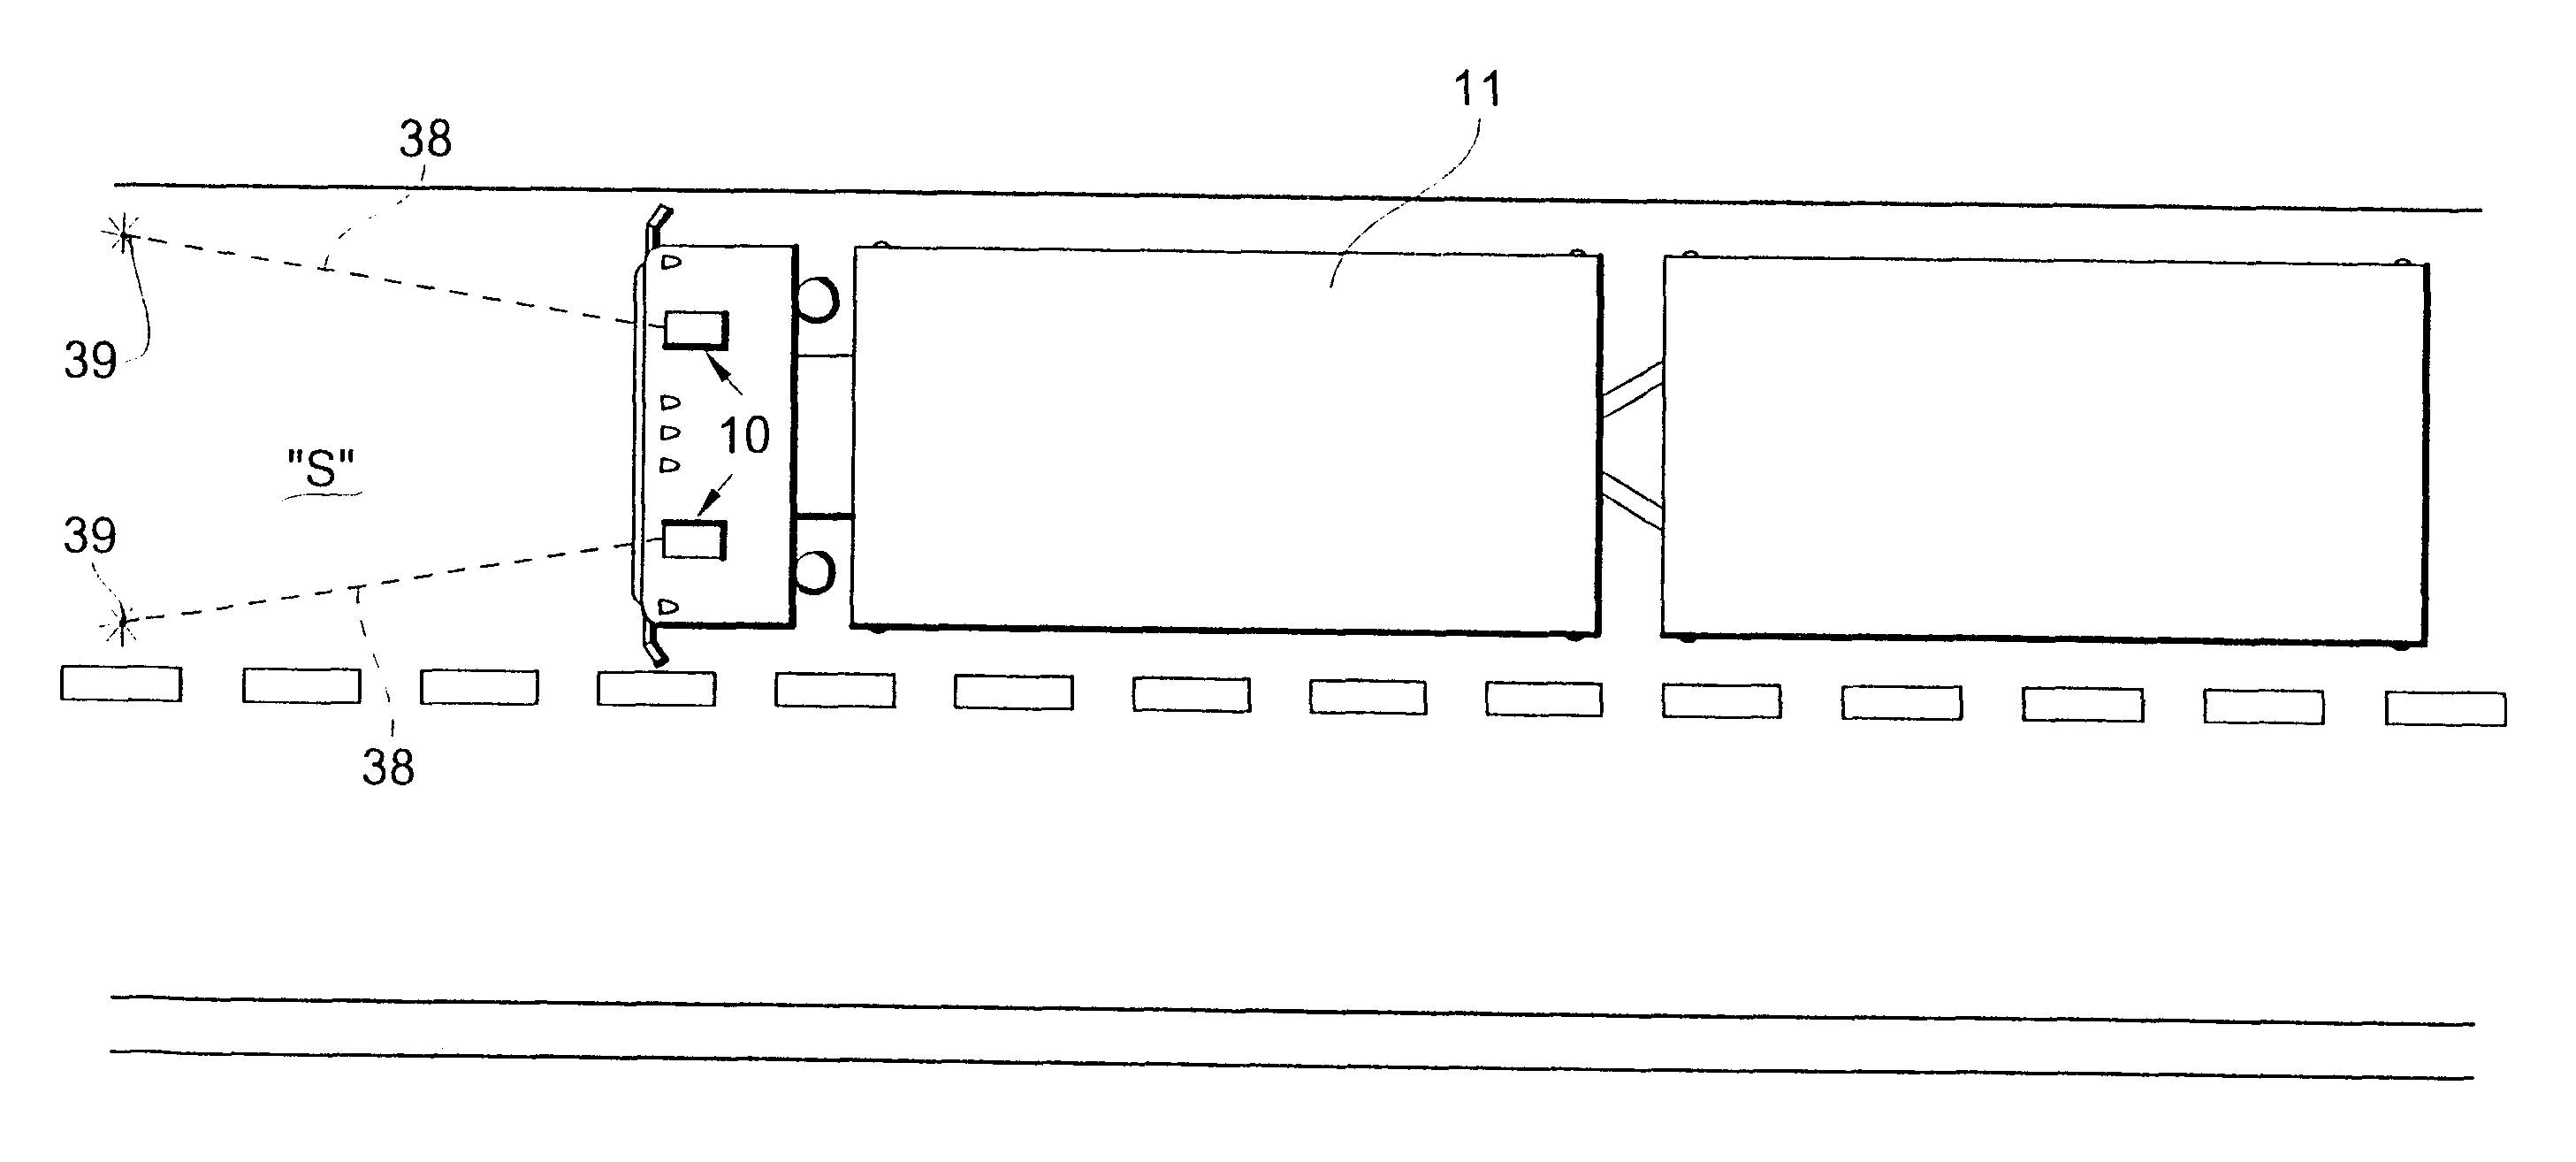 Vehicle guidance assembly and method